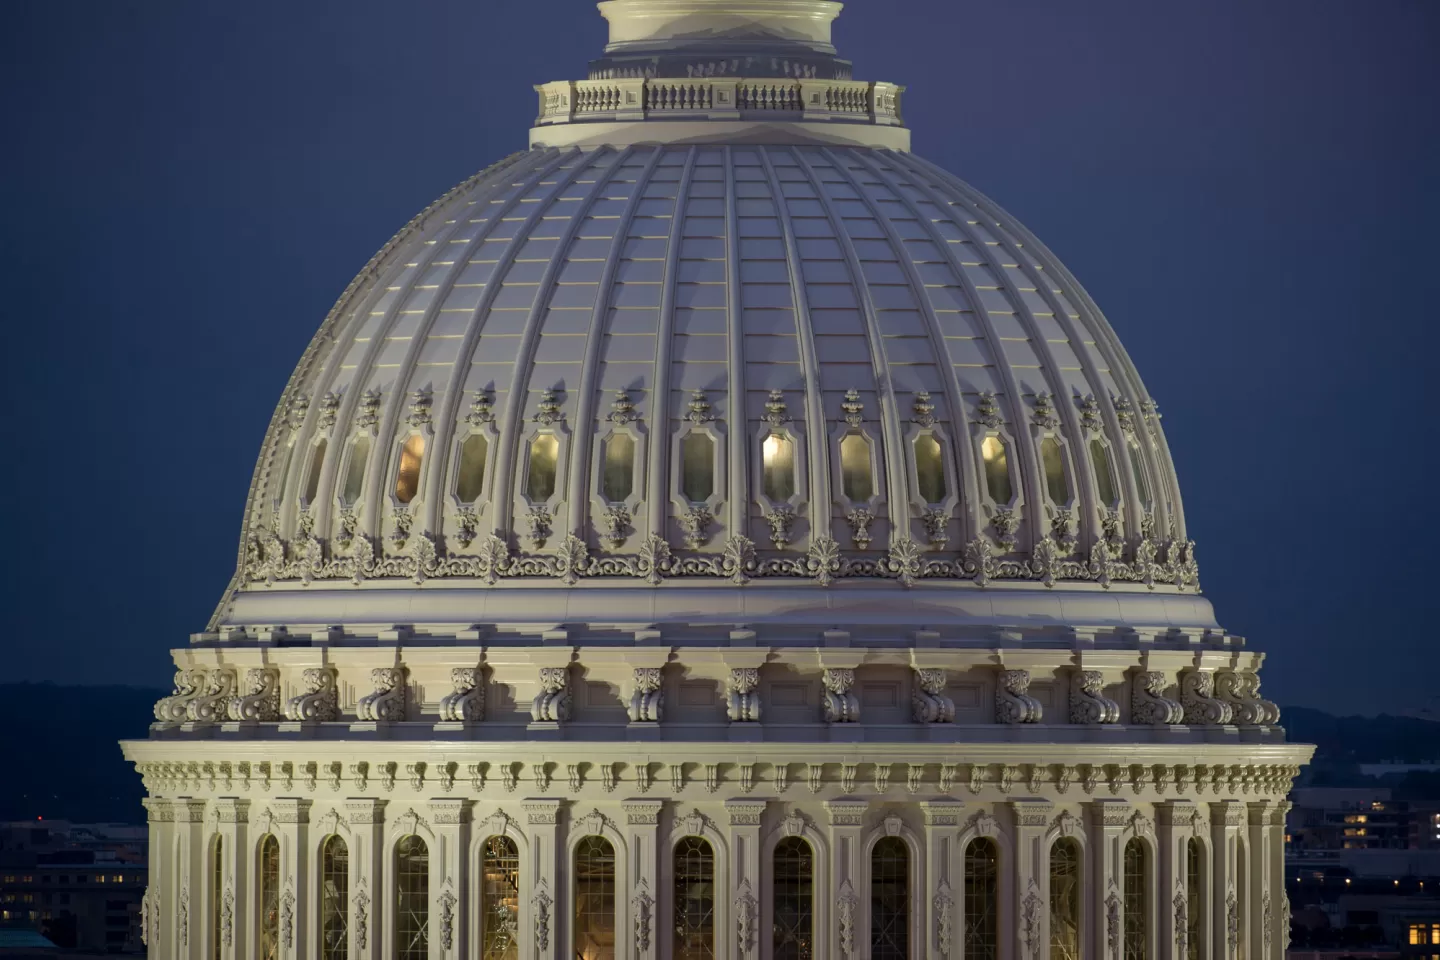 The U.S. Capitol Dome's cupola at night.